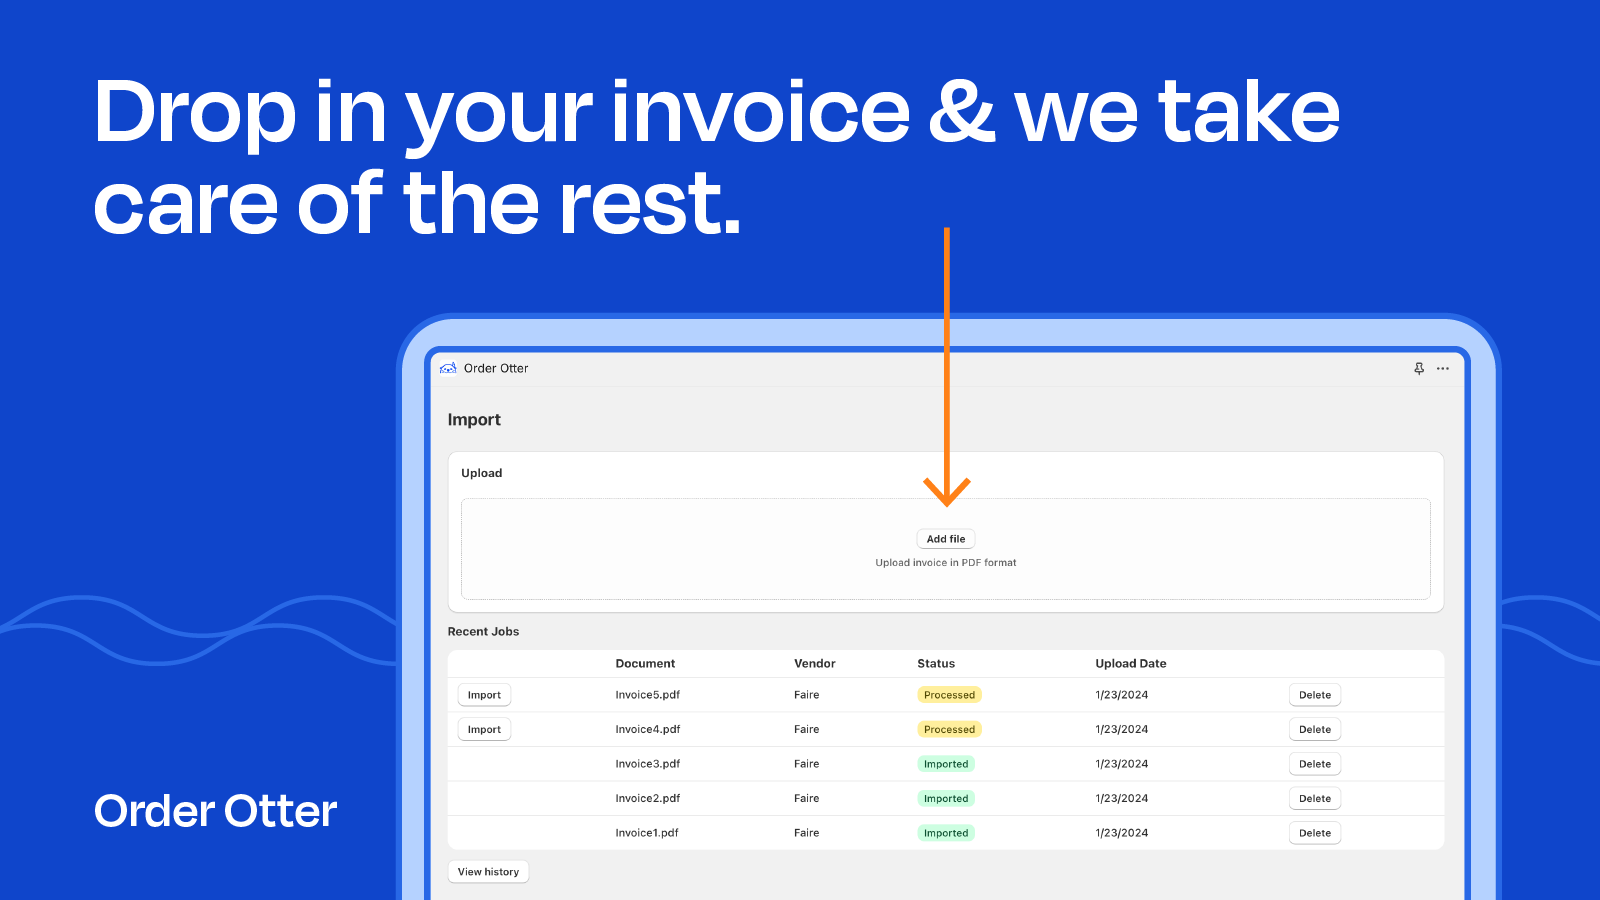 Drop in your invoice and we take care of the rest.